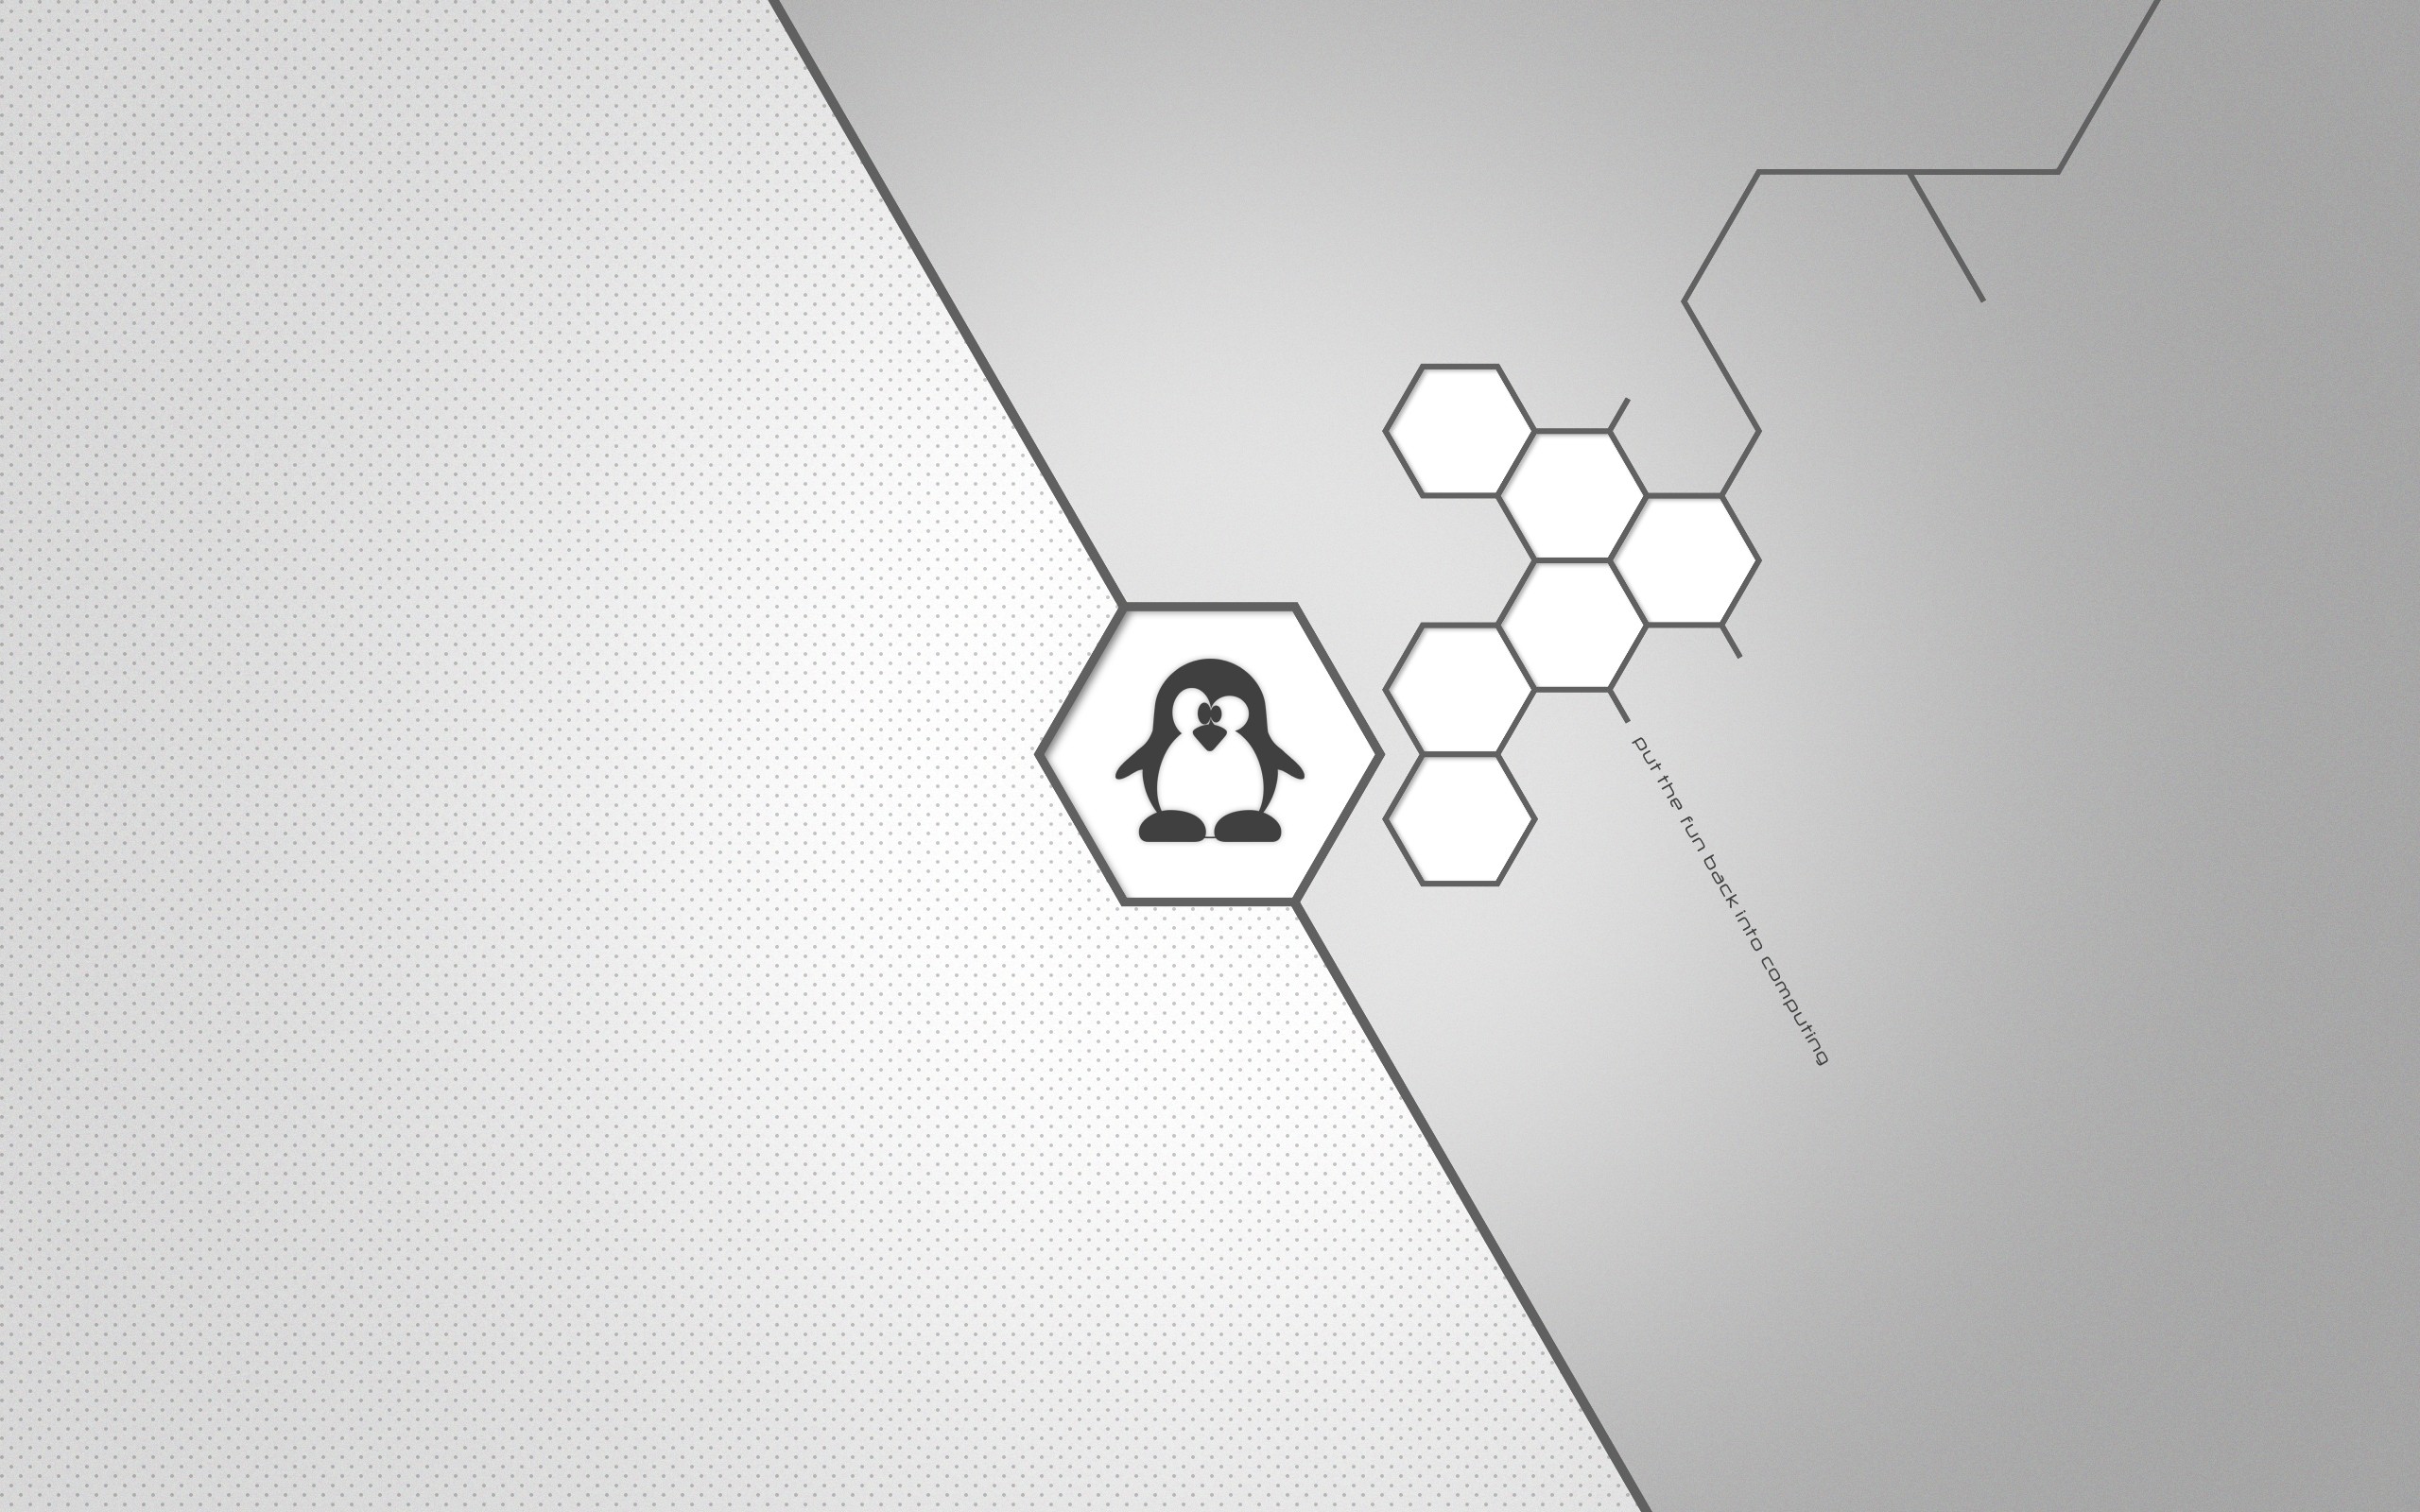 General 2560x1600 Linux computer technology hexagon operating system text penguins animals shapes digital art Tux